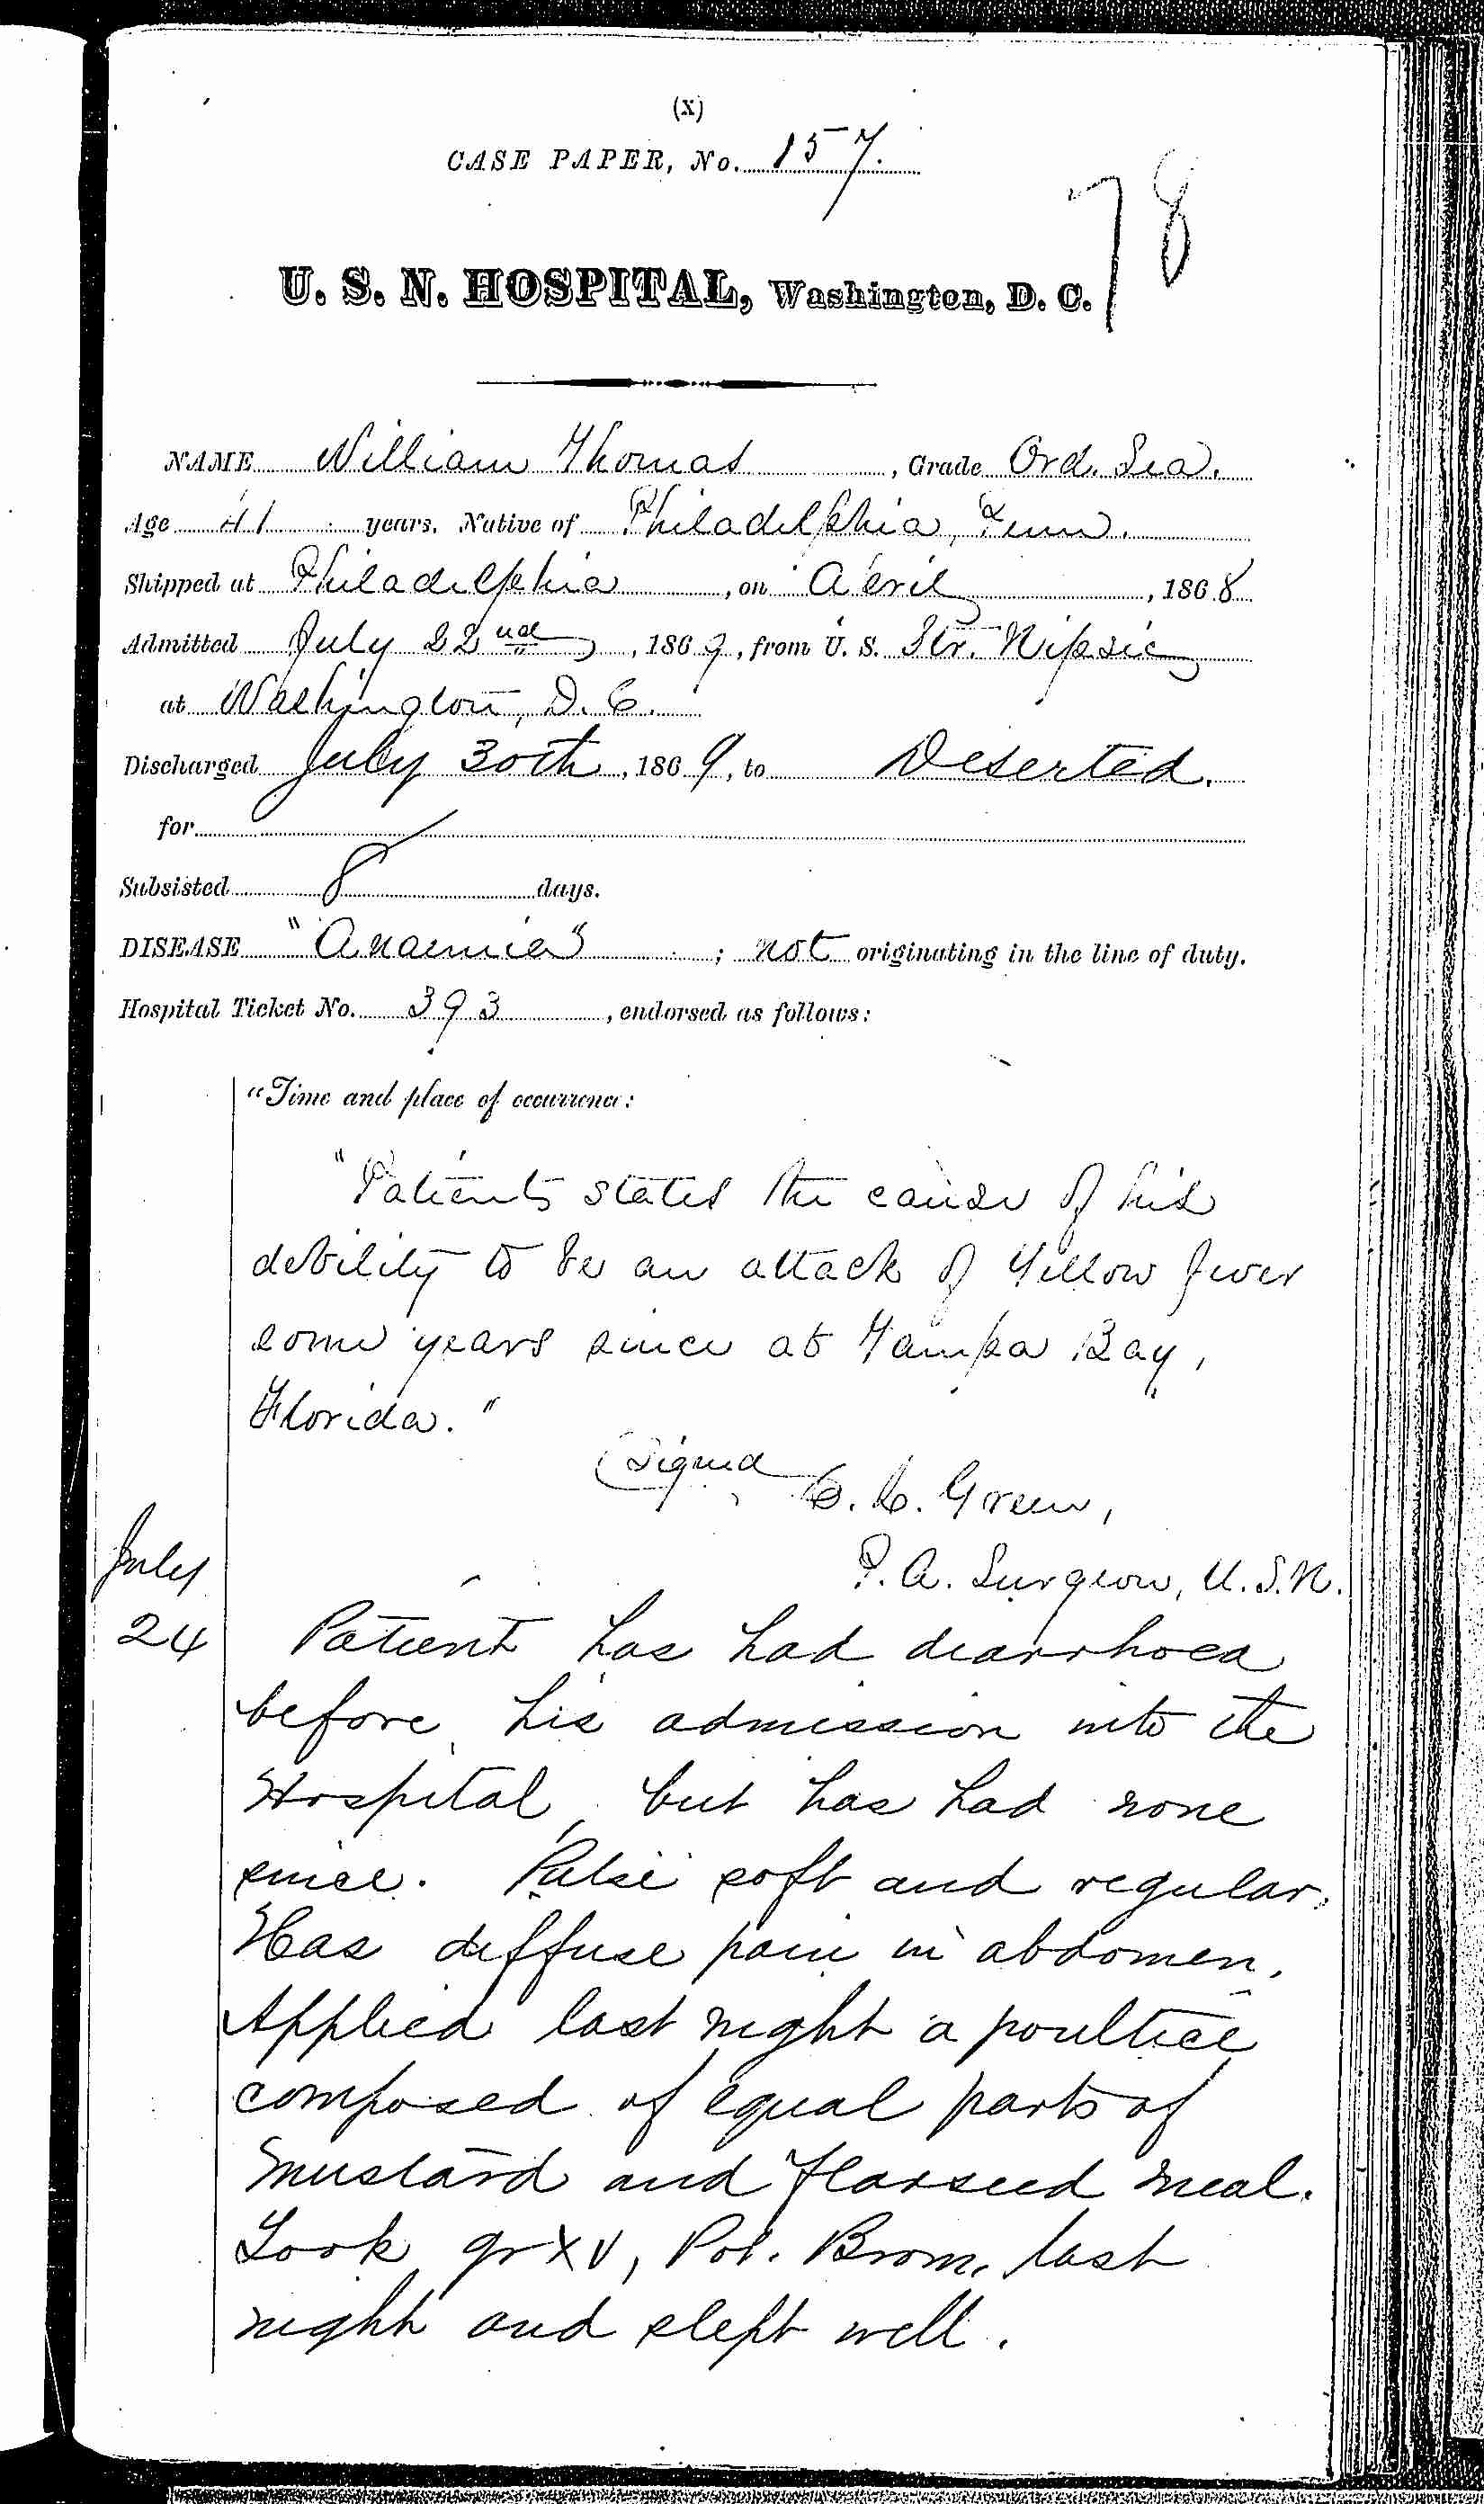 Entry for William Thomas (page 1 of 2) in the log Hospital Tickets and Case Papers - Naval Hospital - Washington, D.C. - 1868-69